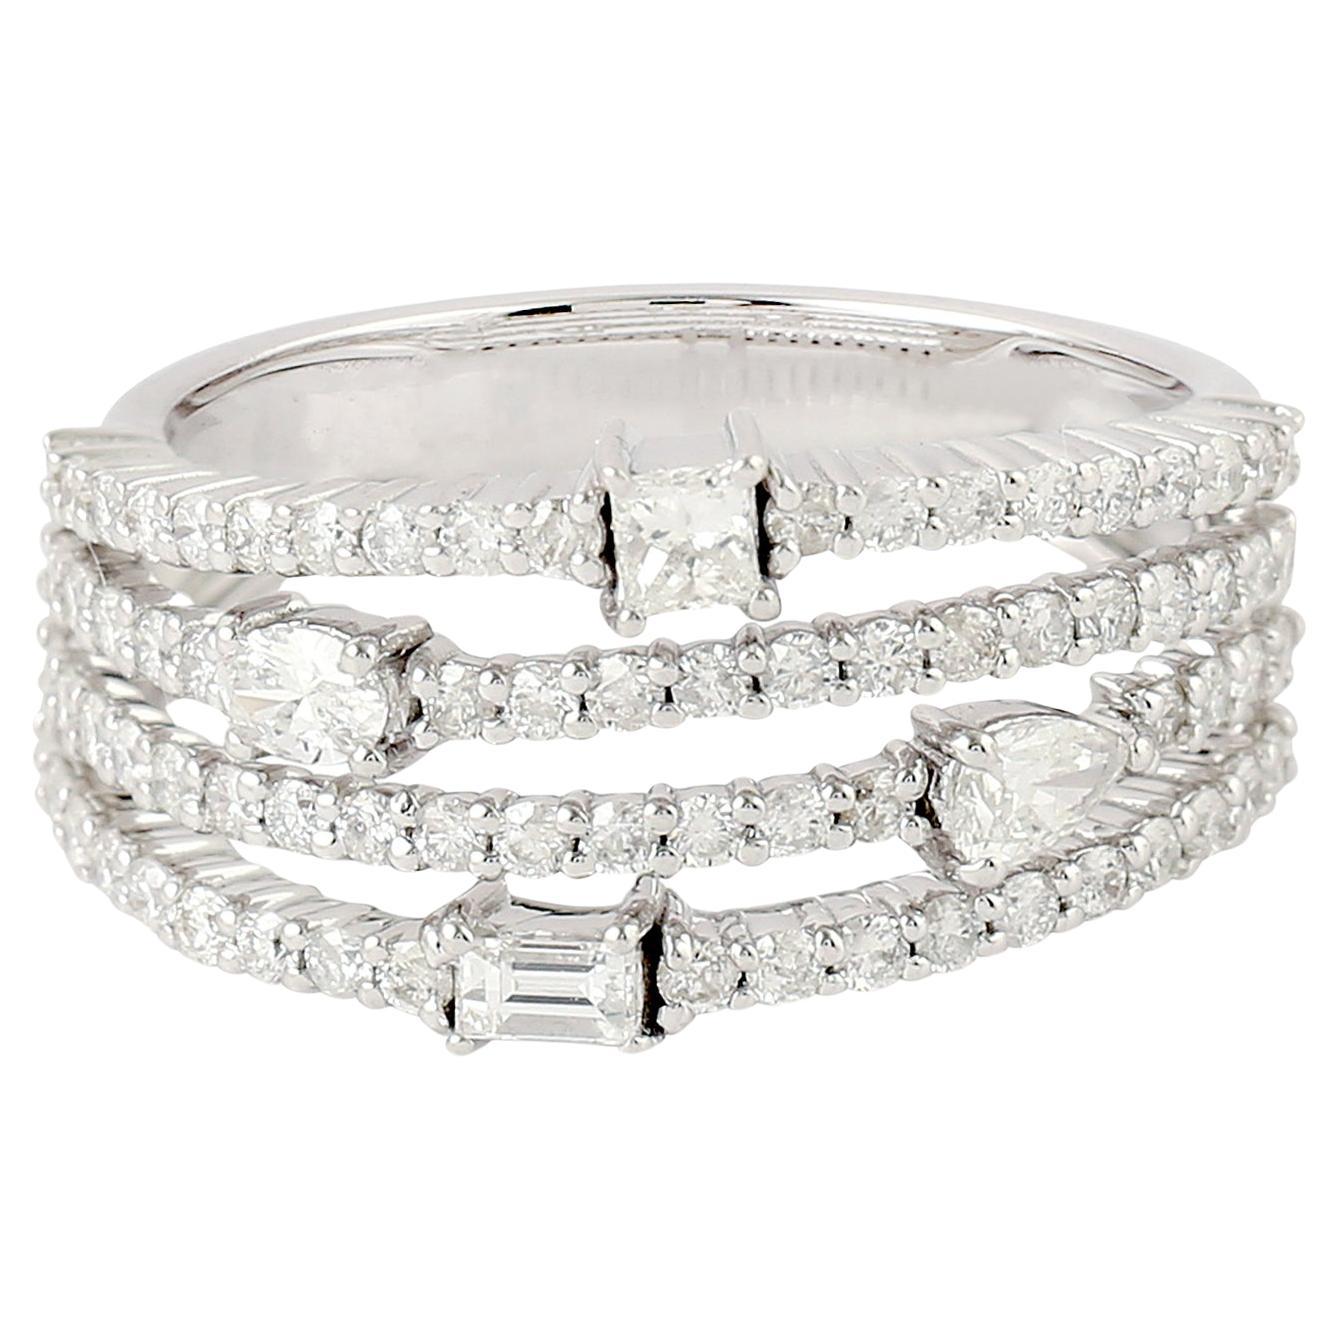 Fancy Diamond Band Ring With Pave Diamonds Made In 18k White Gold For Sale